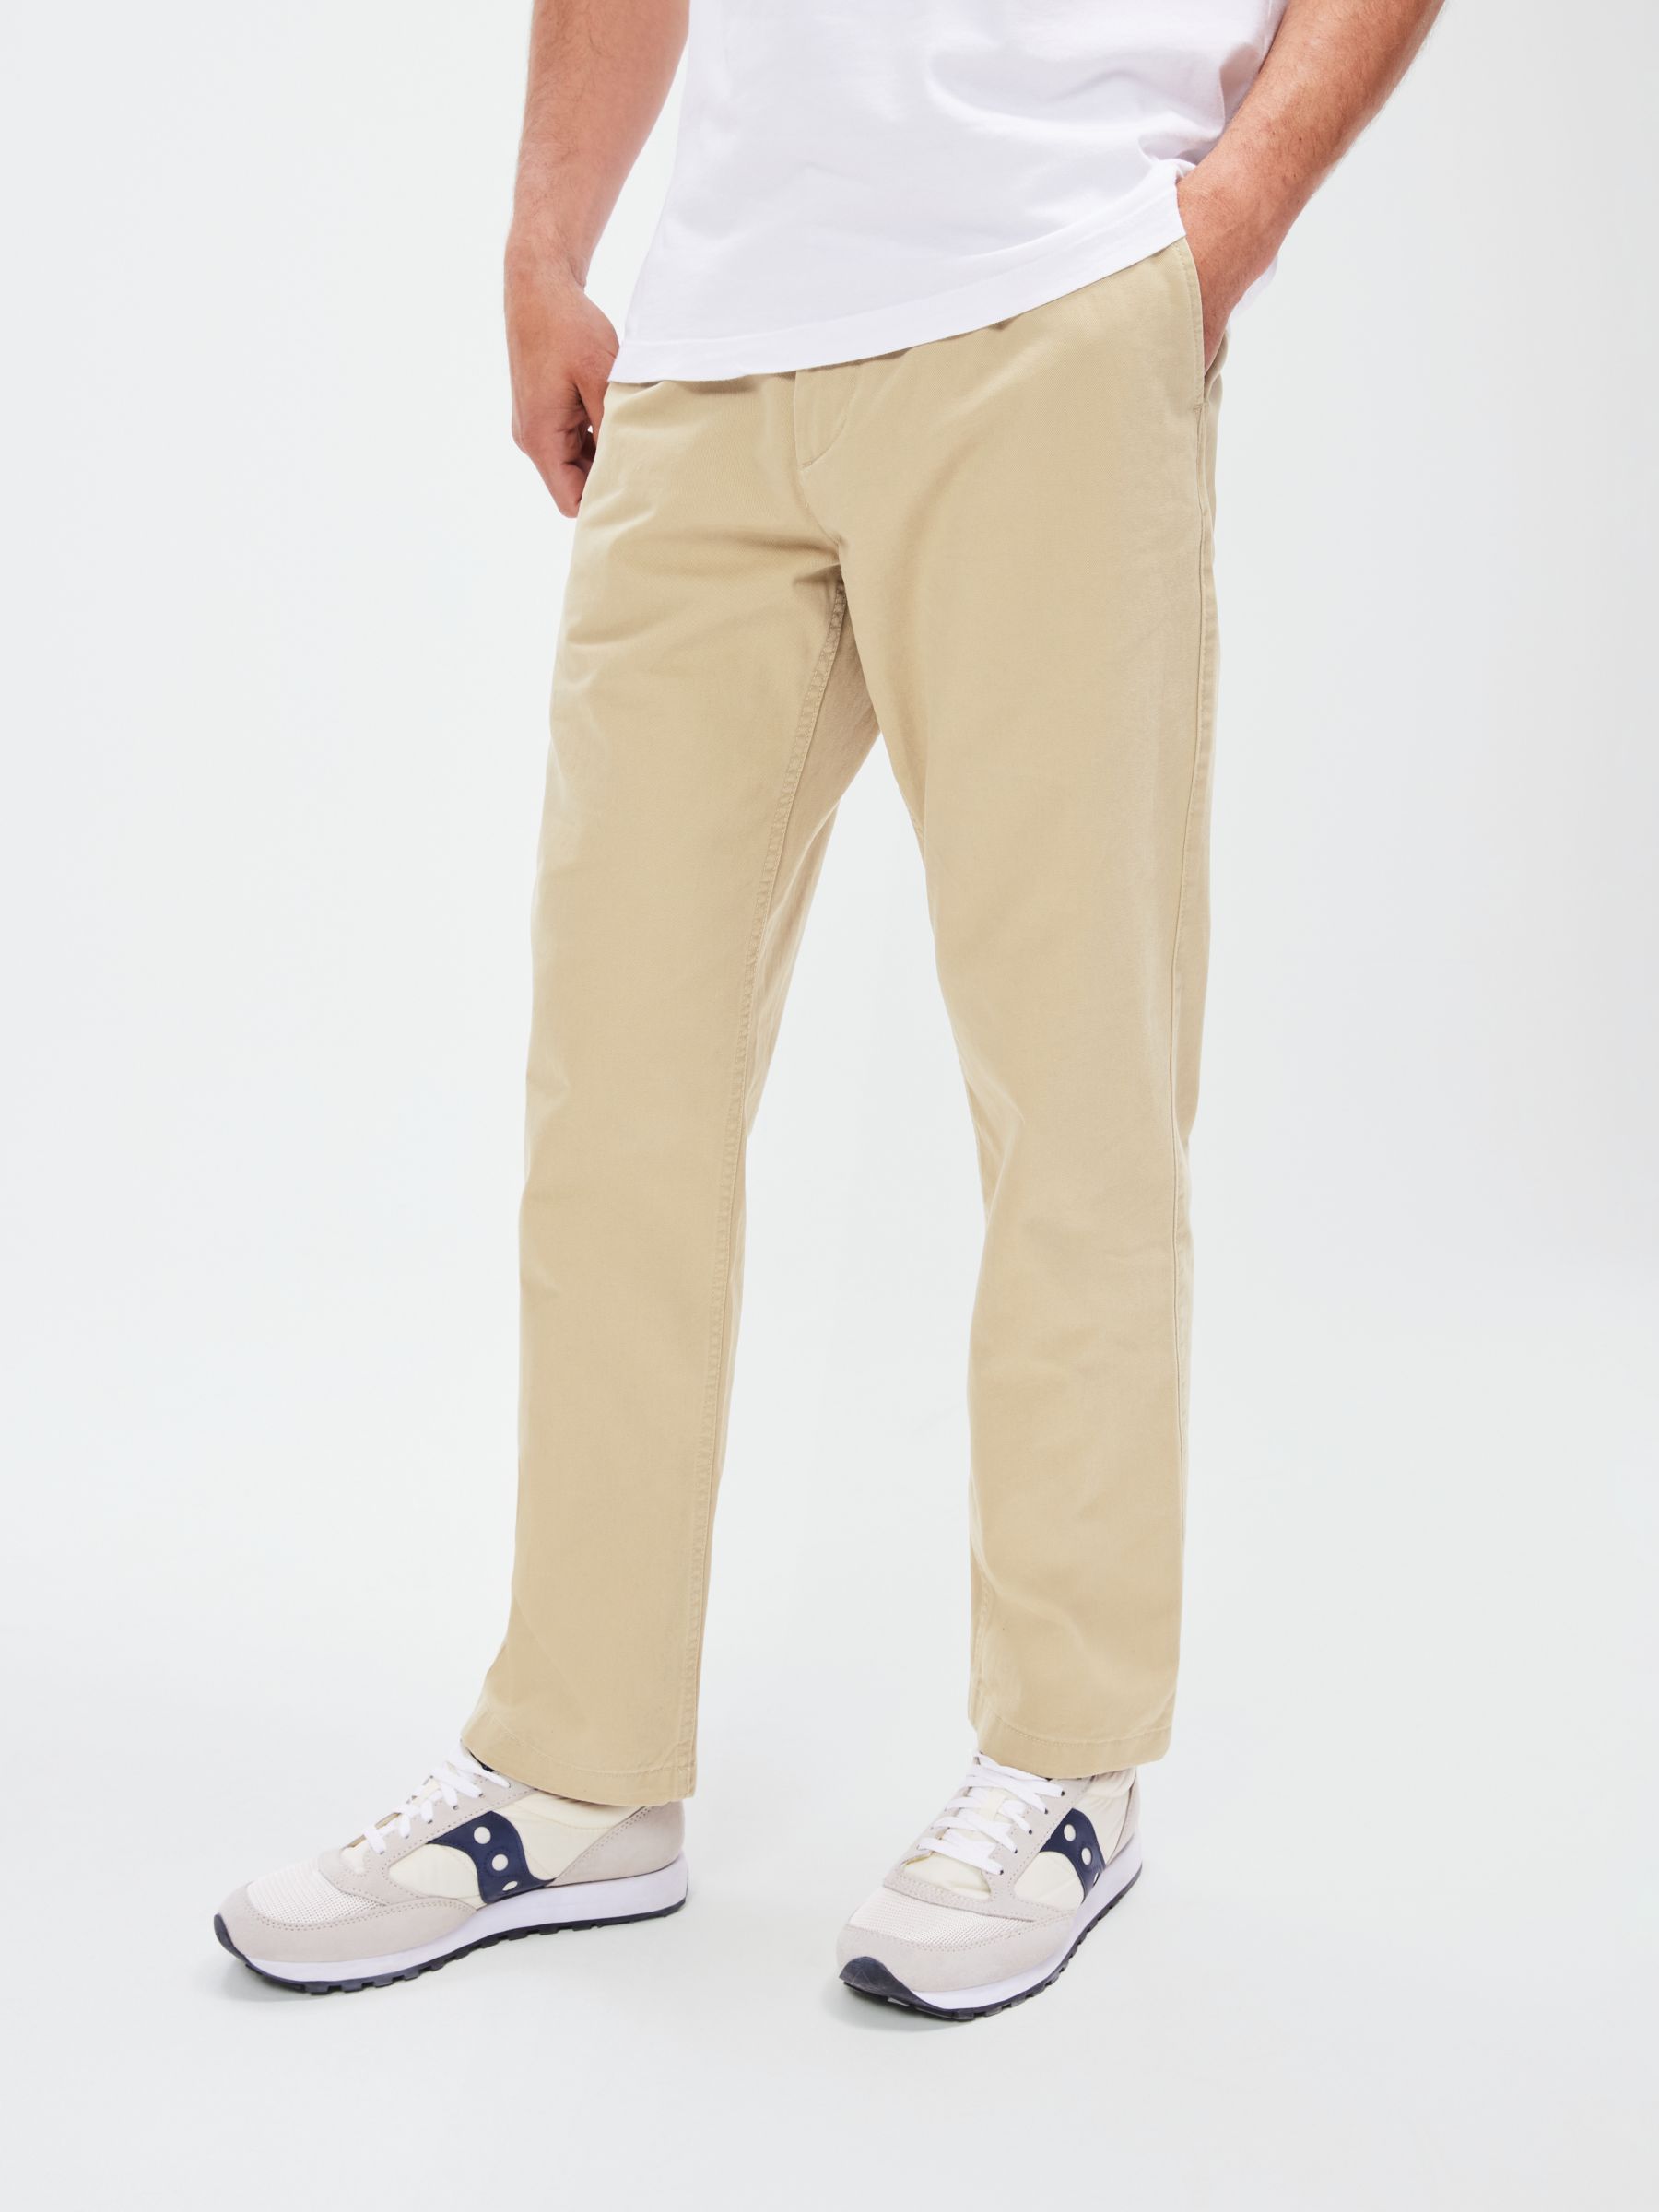 John Lewis Relaxed Fit Cotton Chinos